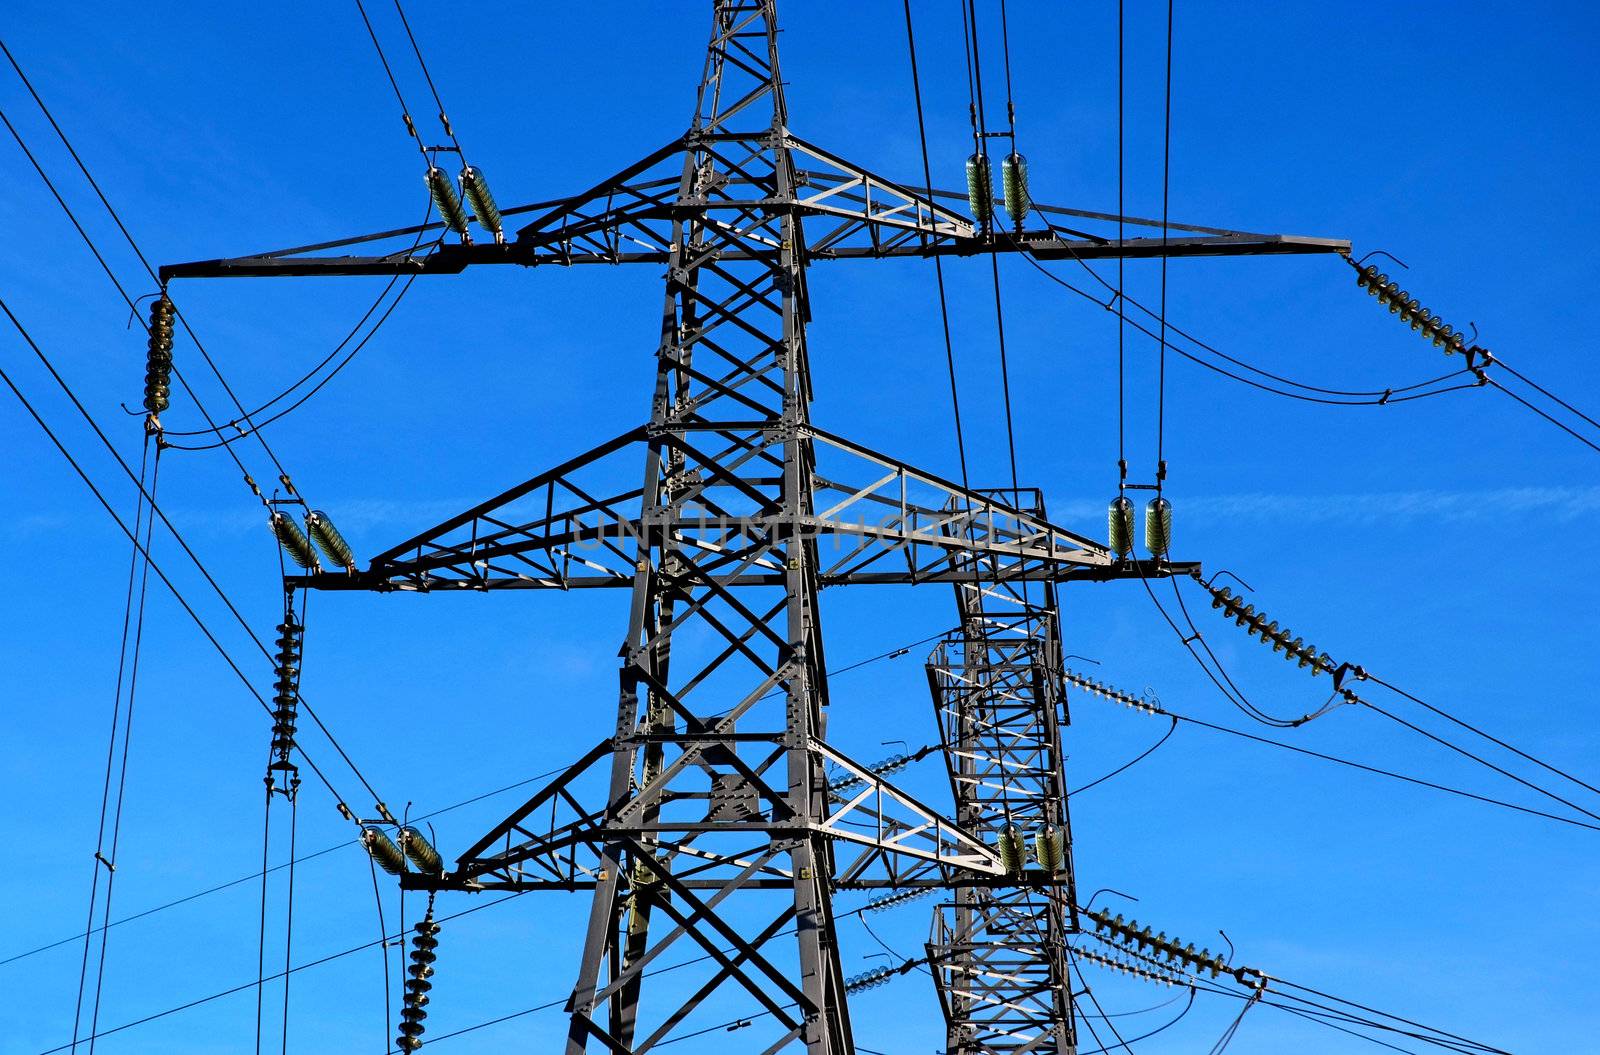 Two electricity pylons with a blue sky background